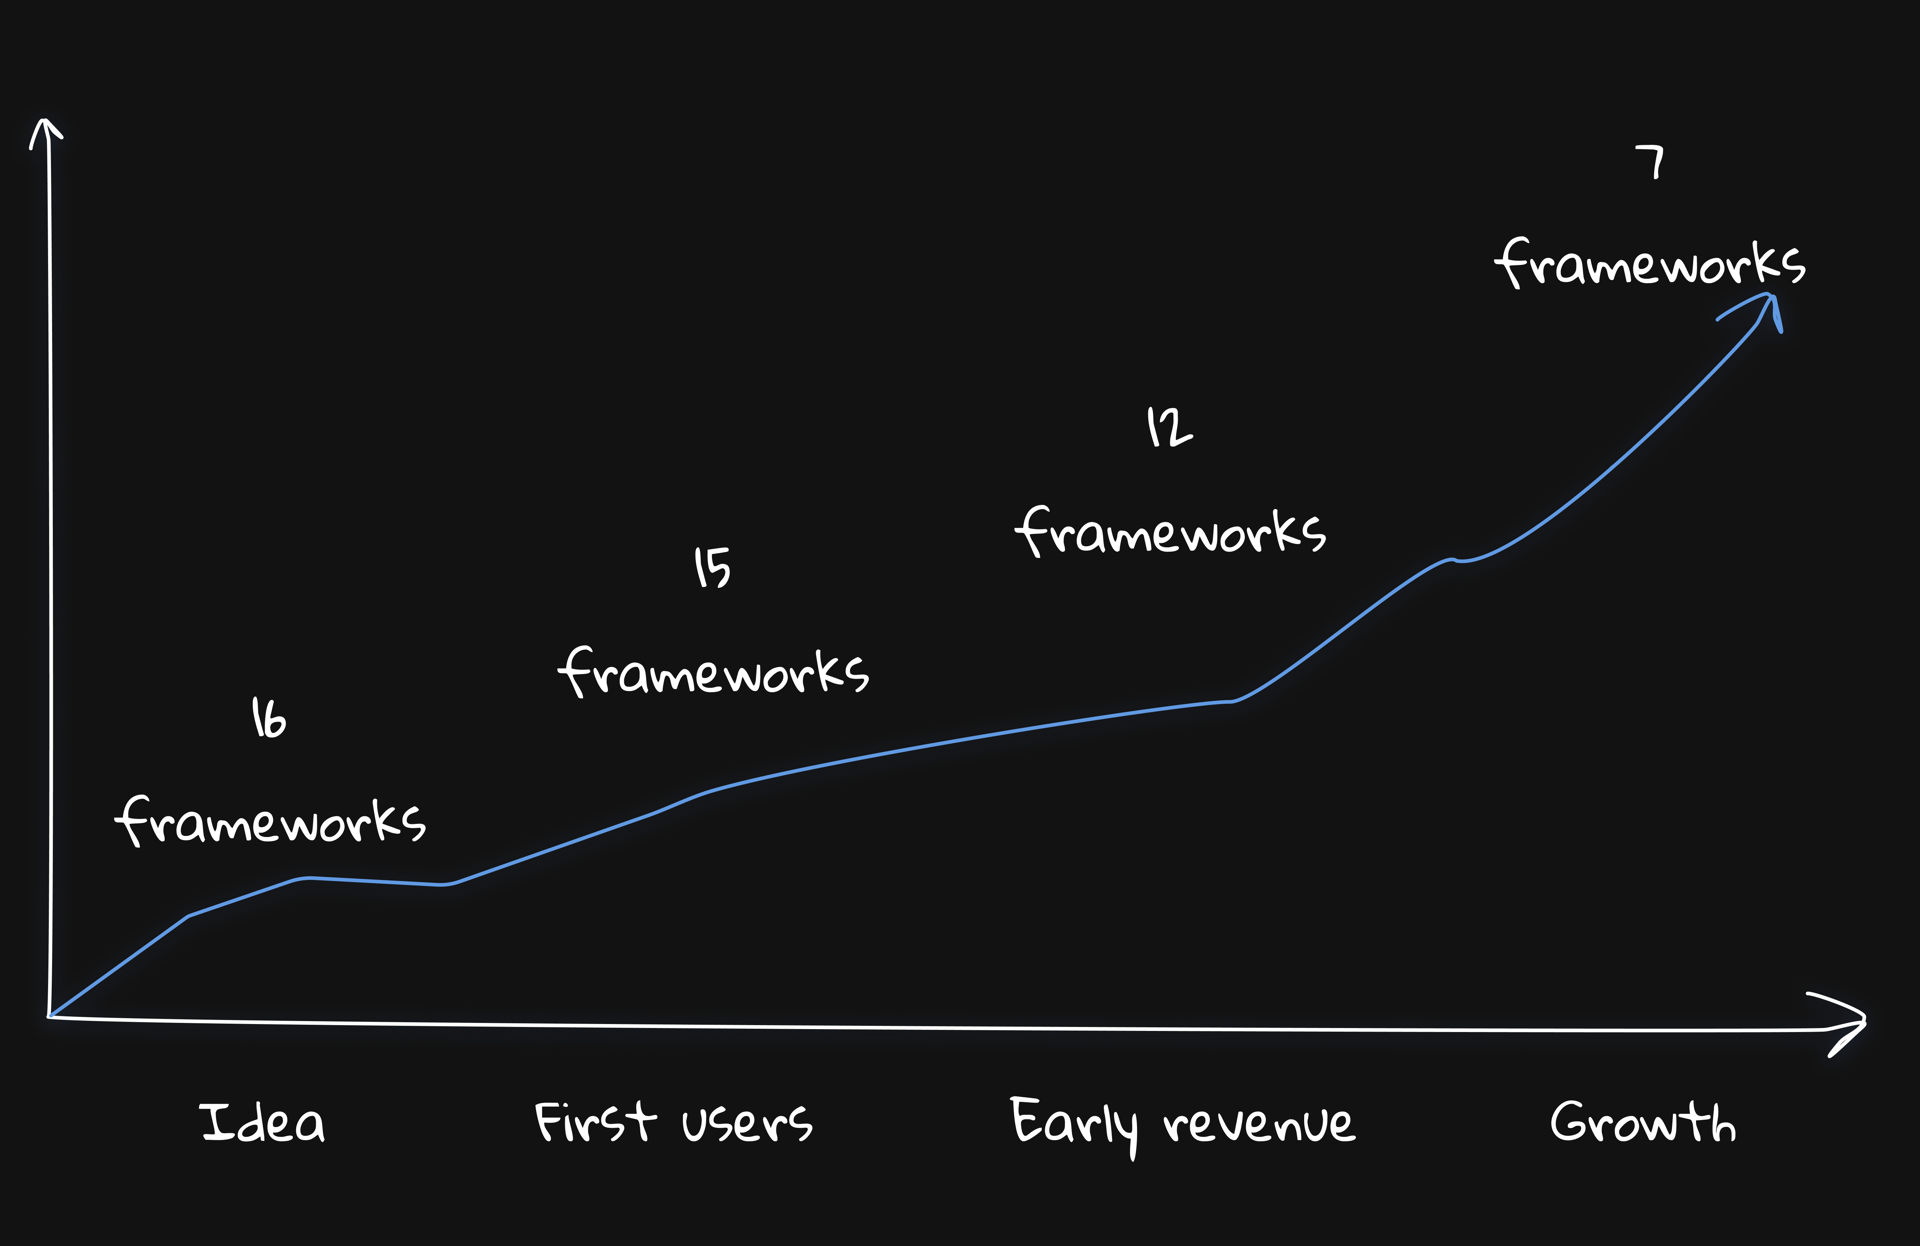 Distribution of frameworks across product stages